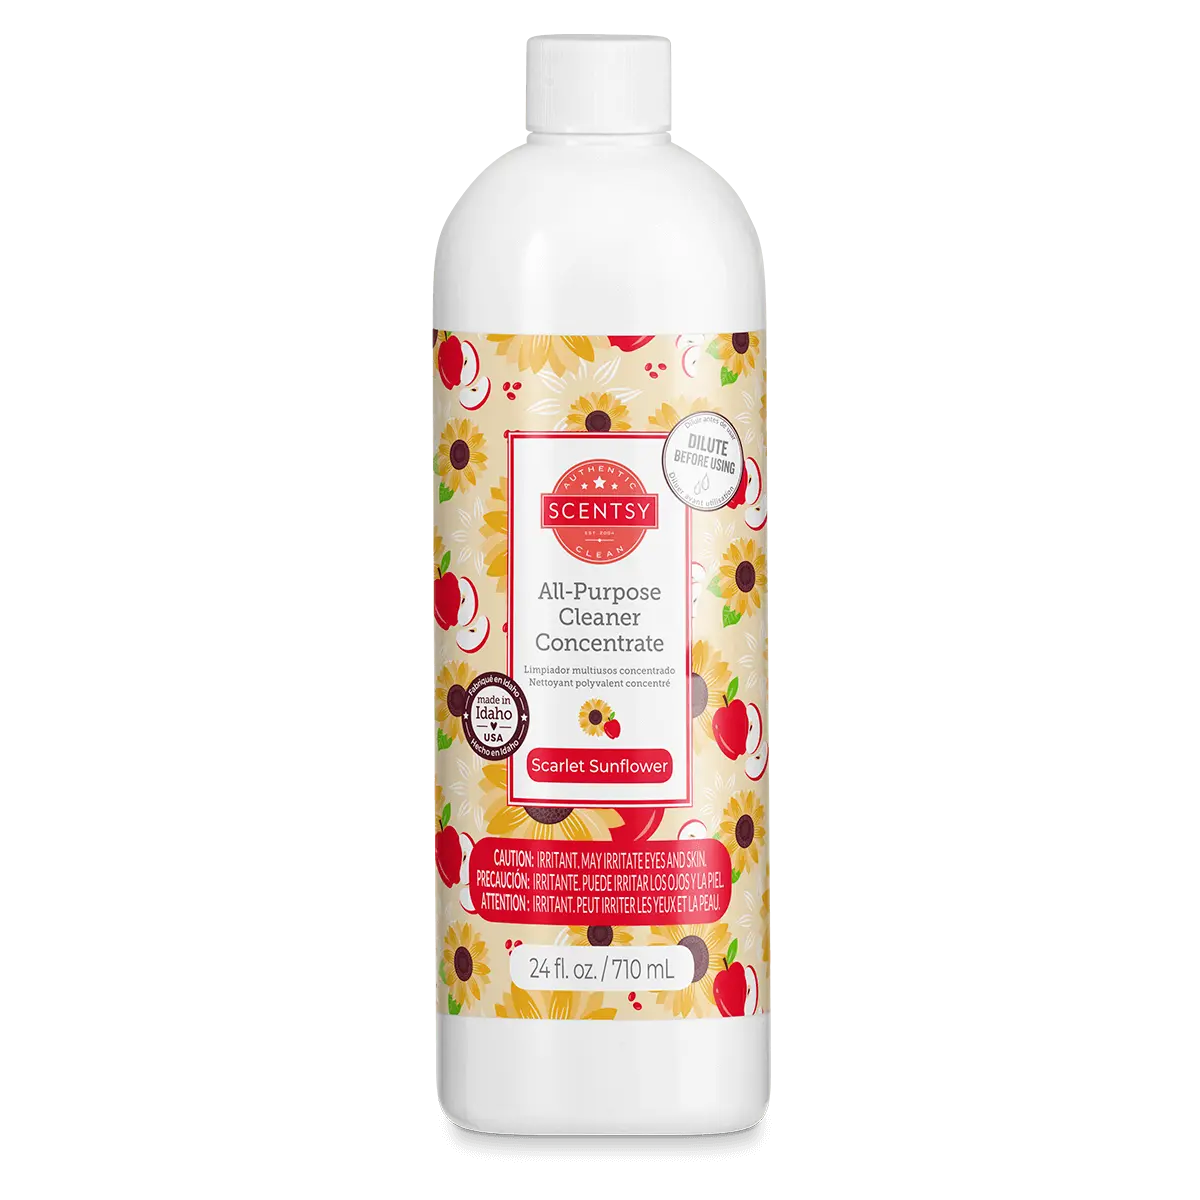 Scarlet Sunflower All-Purpose Cleaner Concentrate
